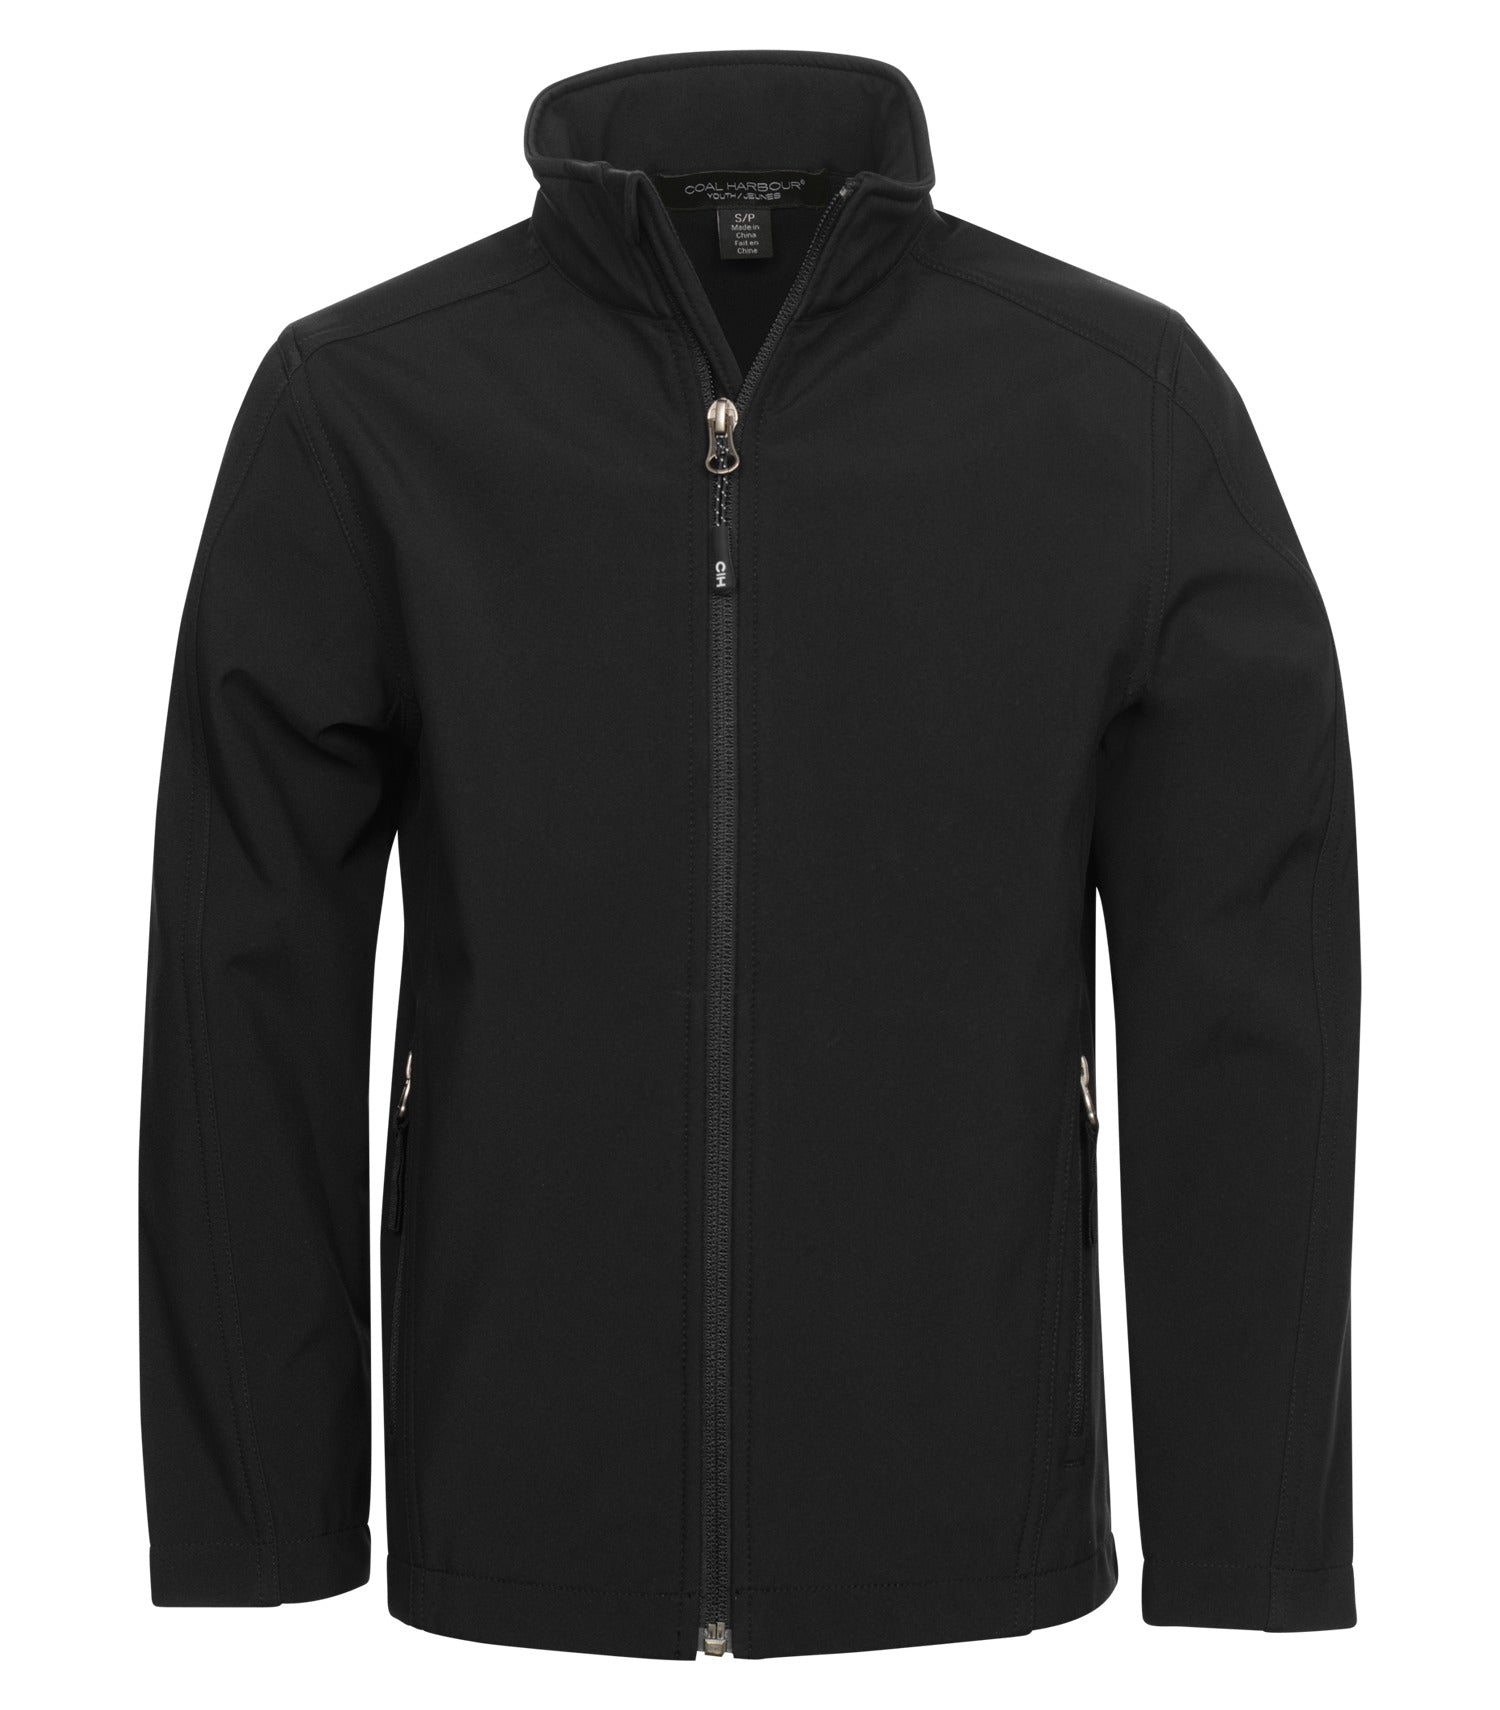 COAL HARBOUR® EVERYDAY WATER REPELLENT SOFT SHELL YOUTH JACKET. Y7603